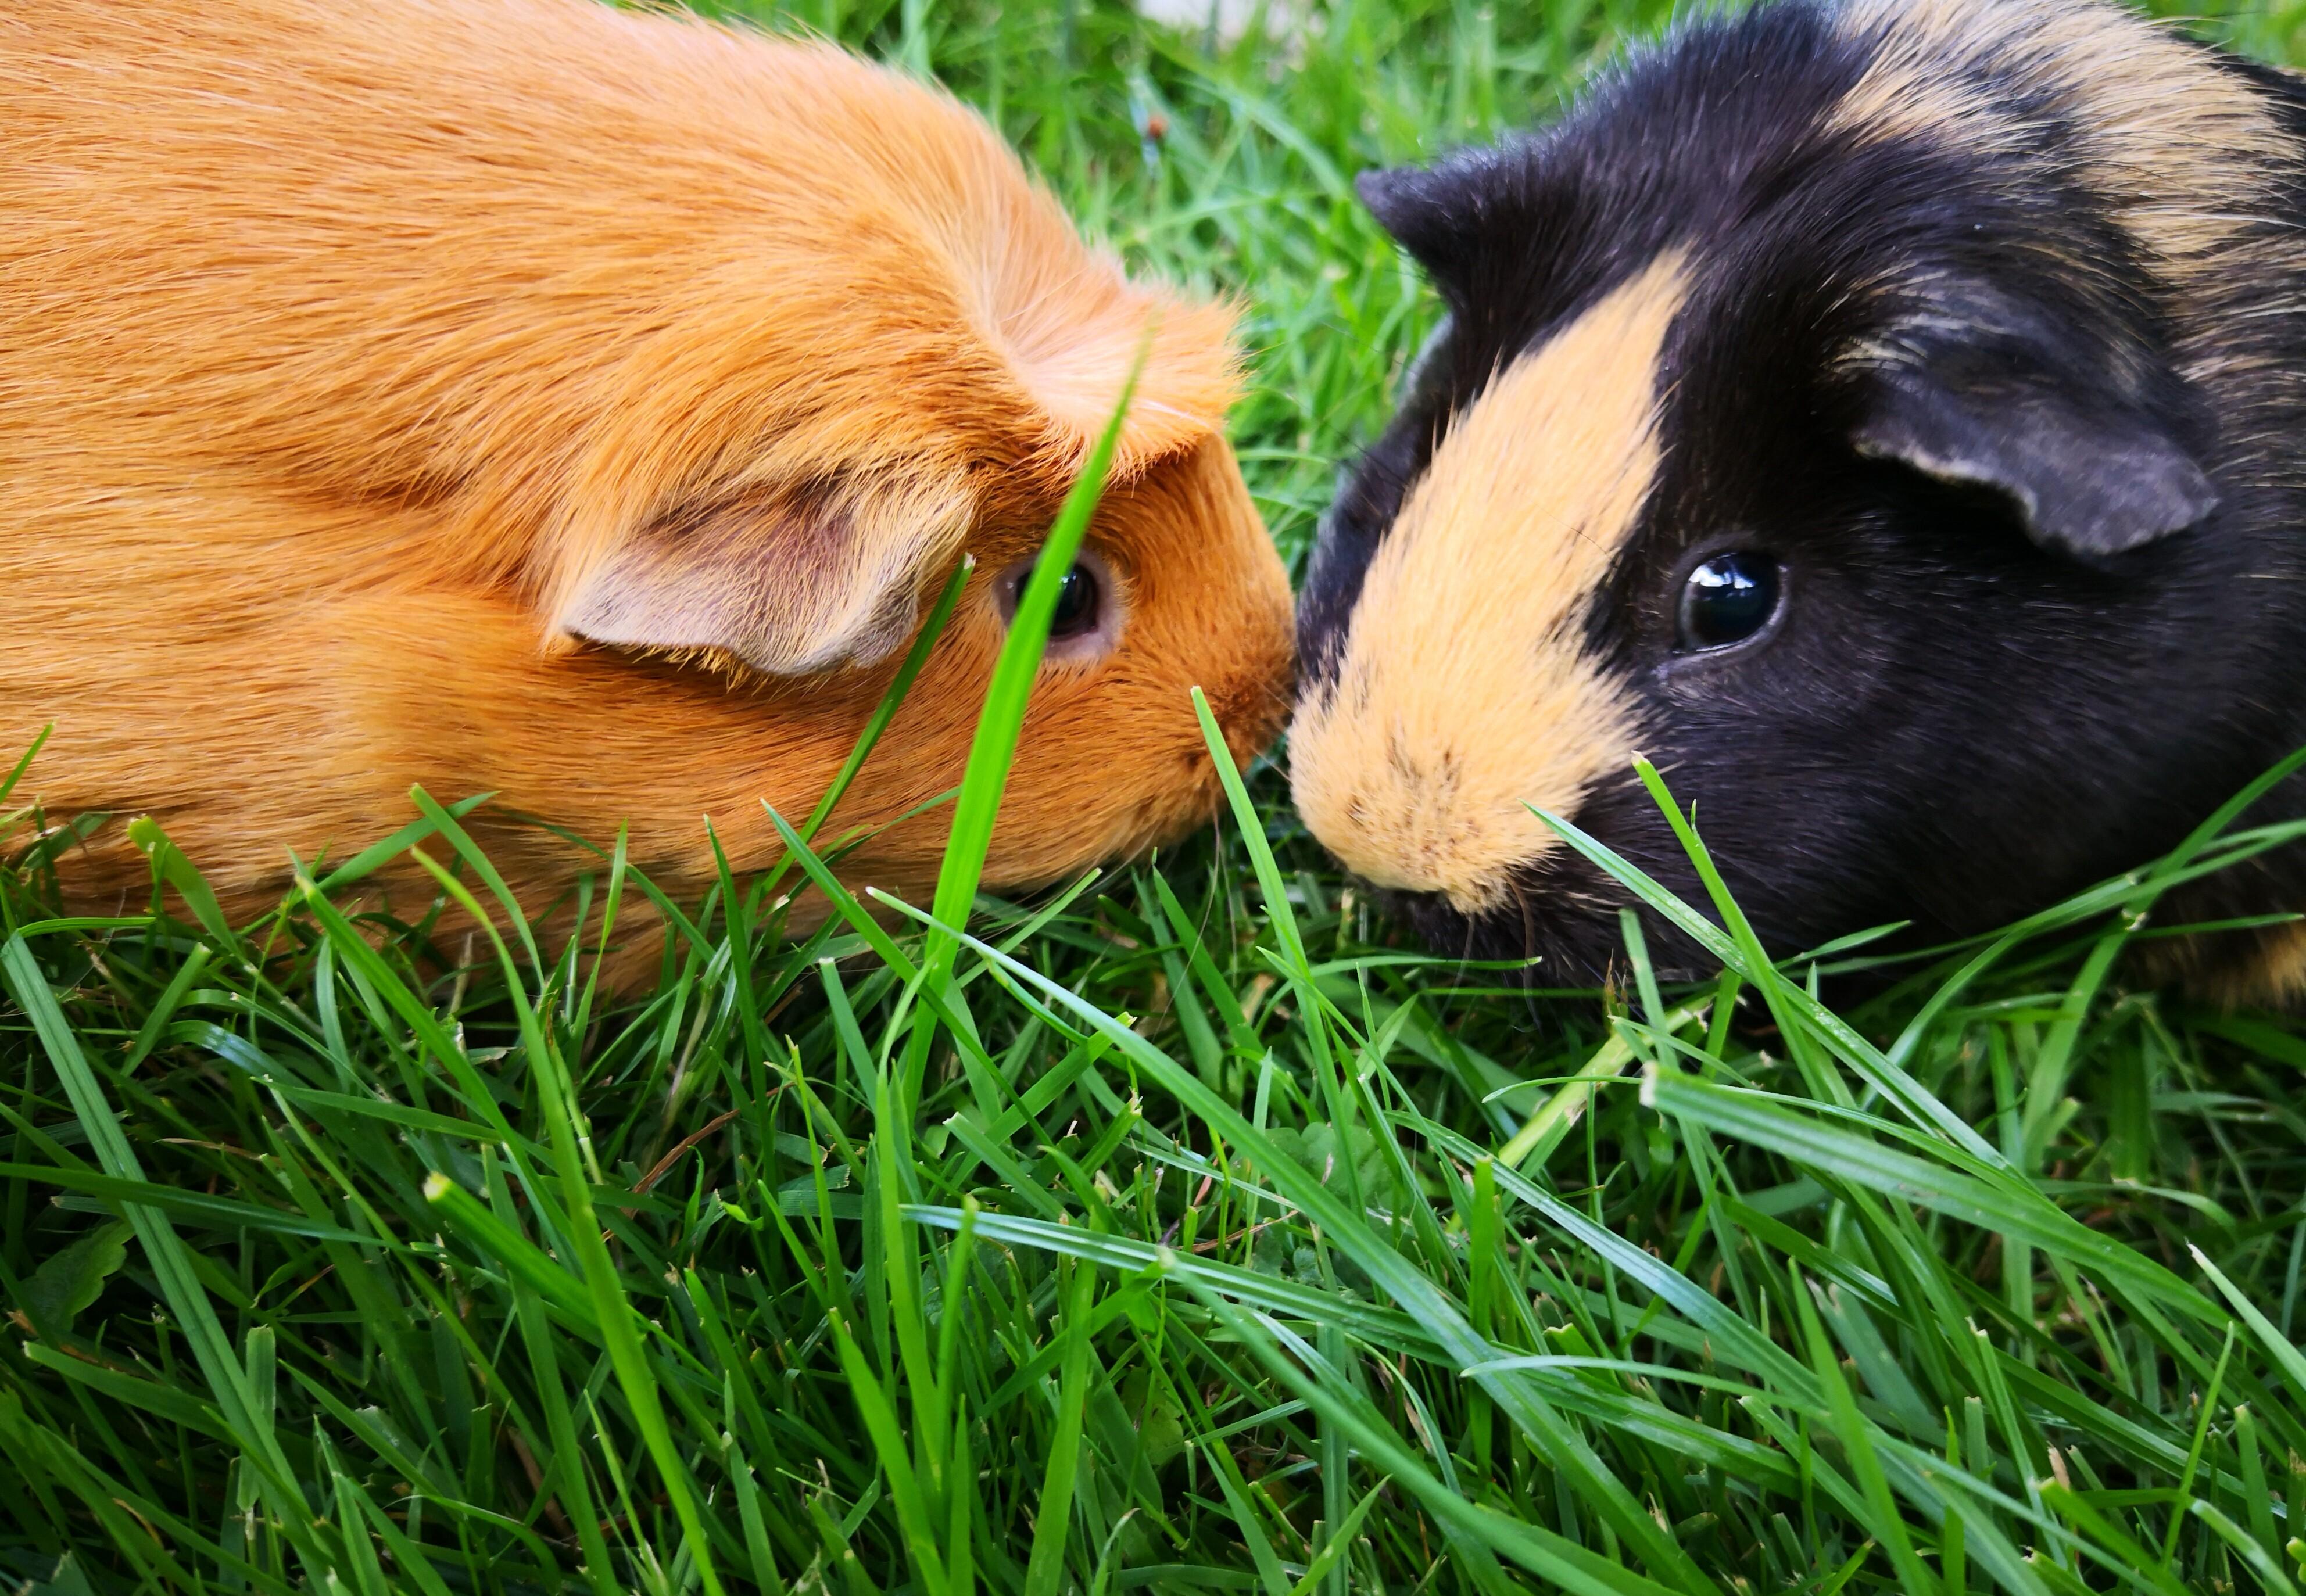 Putting Guinea Pigs Together Publications Guides Our Stories Four Paws Inte...